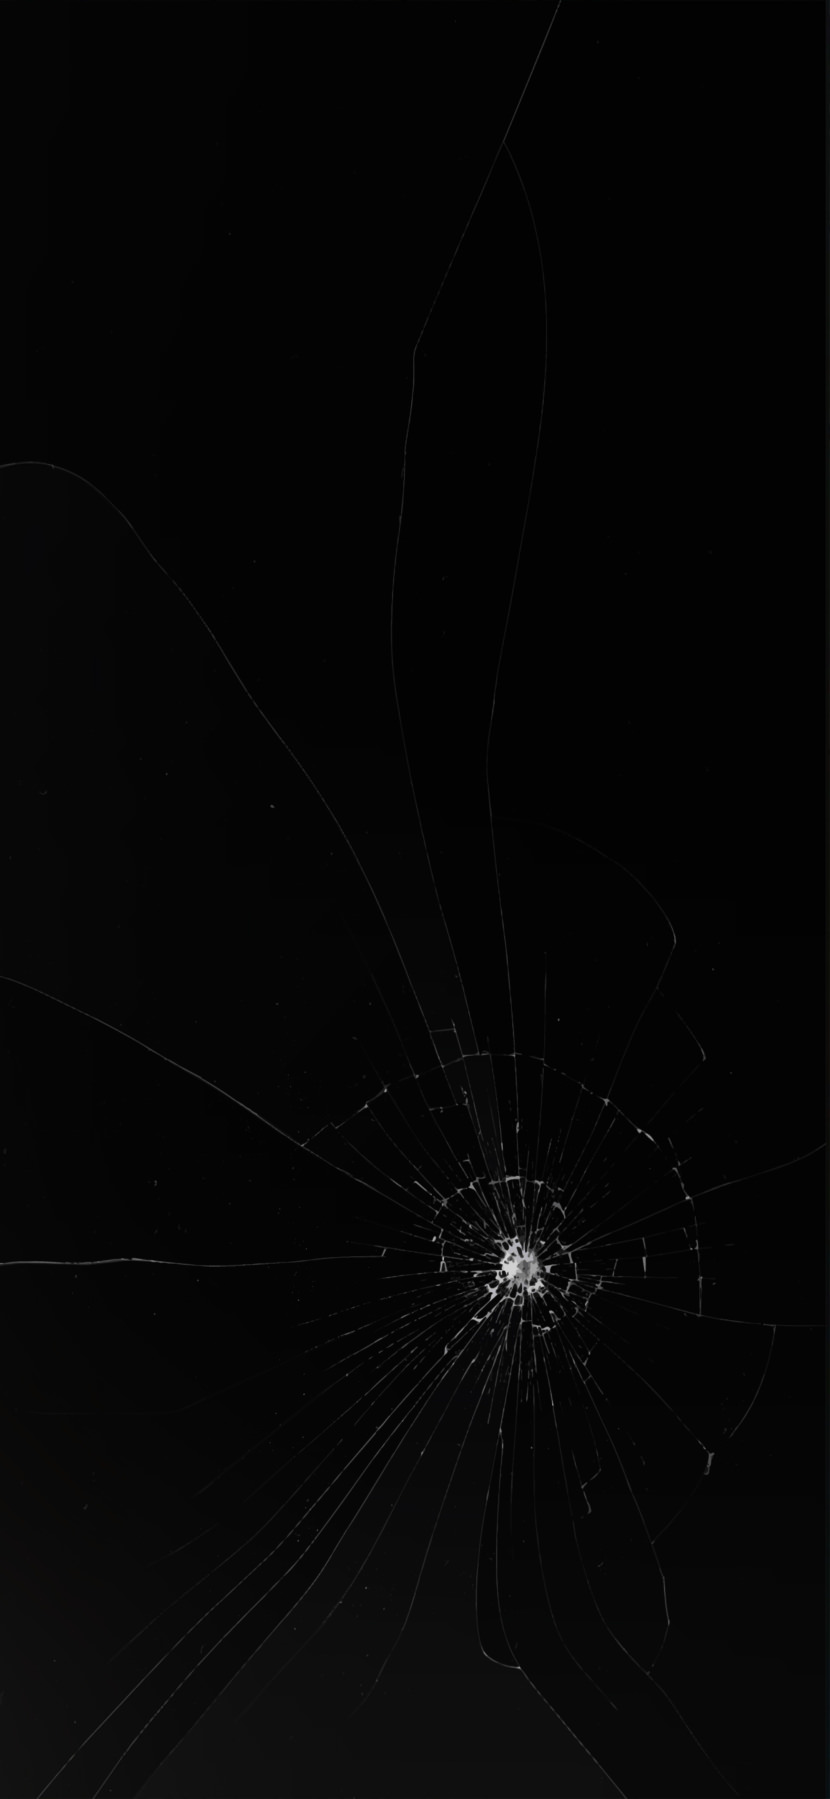 Broken cracked screen wallpaper for Apple iPhone or Android smartphone, ideal for pranks